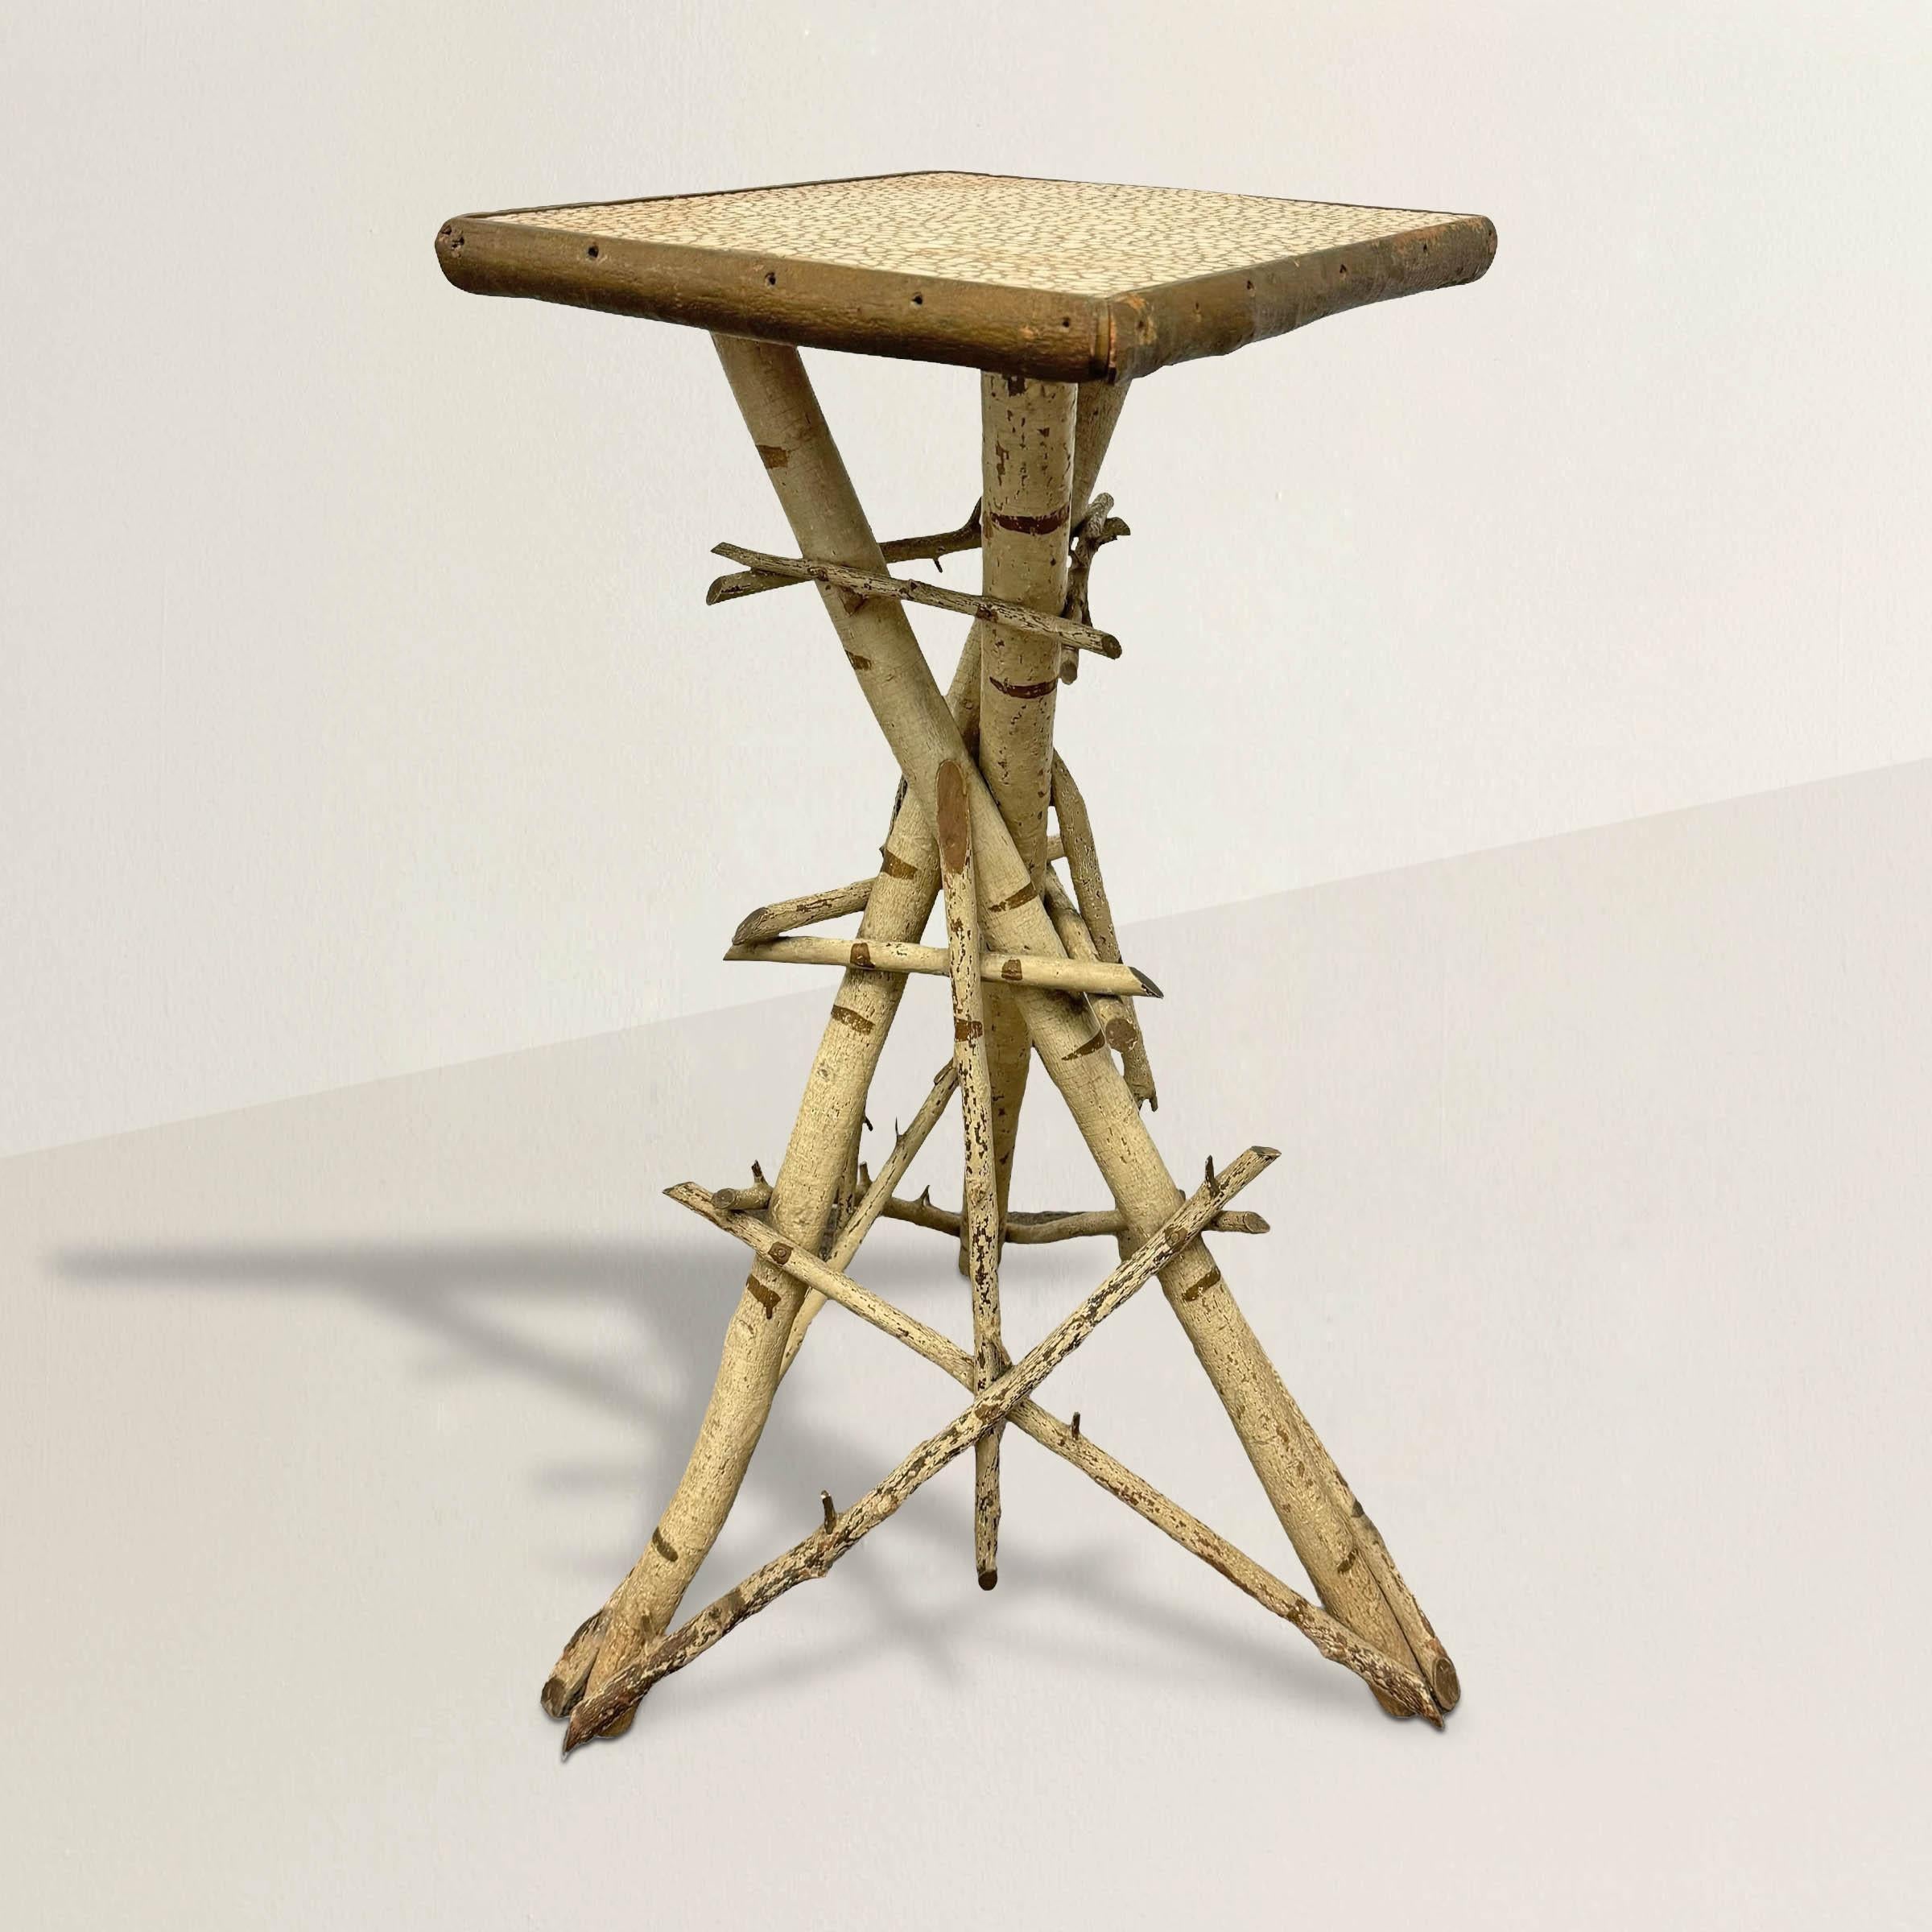 Embrace the rustic charm of early 20th-century American Adirondack design with this exquisite side table, expertly crafted from beech branches and artfully painted white to emulate the iconic birch. The base, formed from three large branches